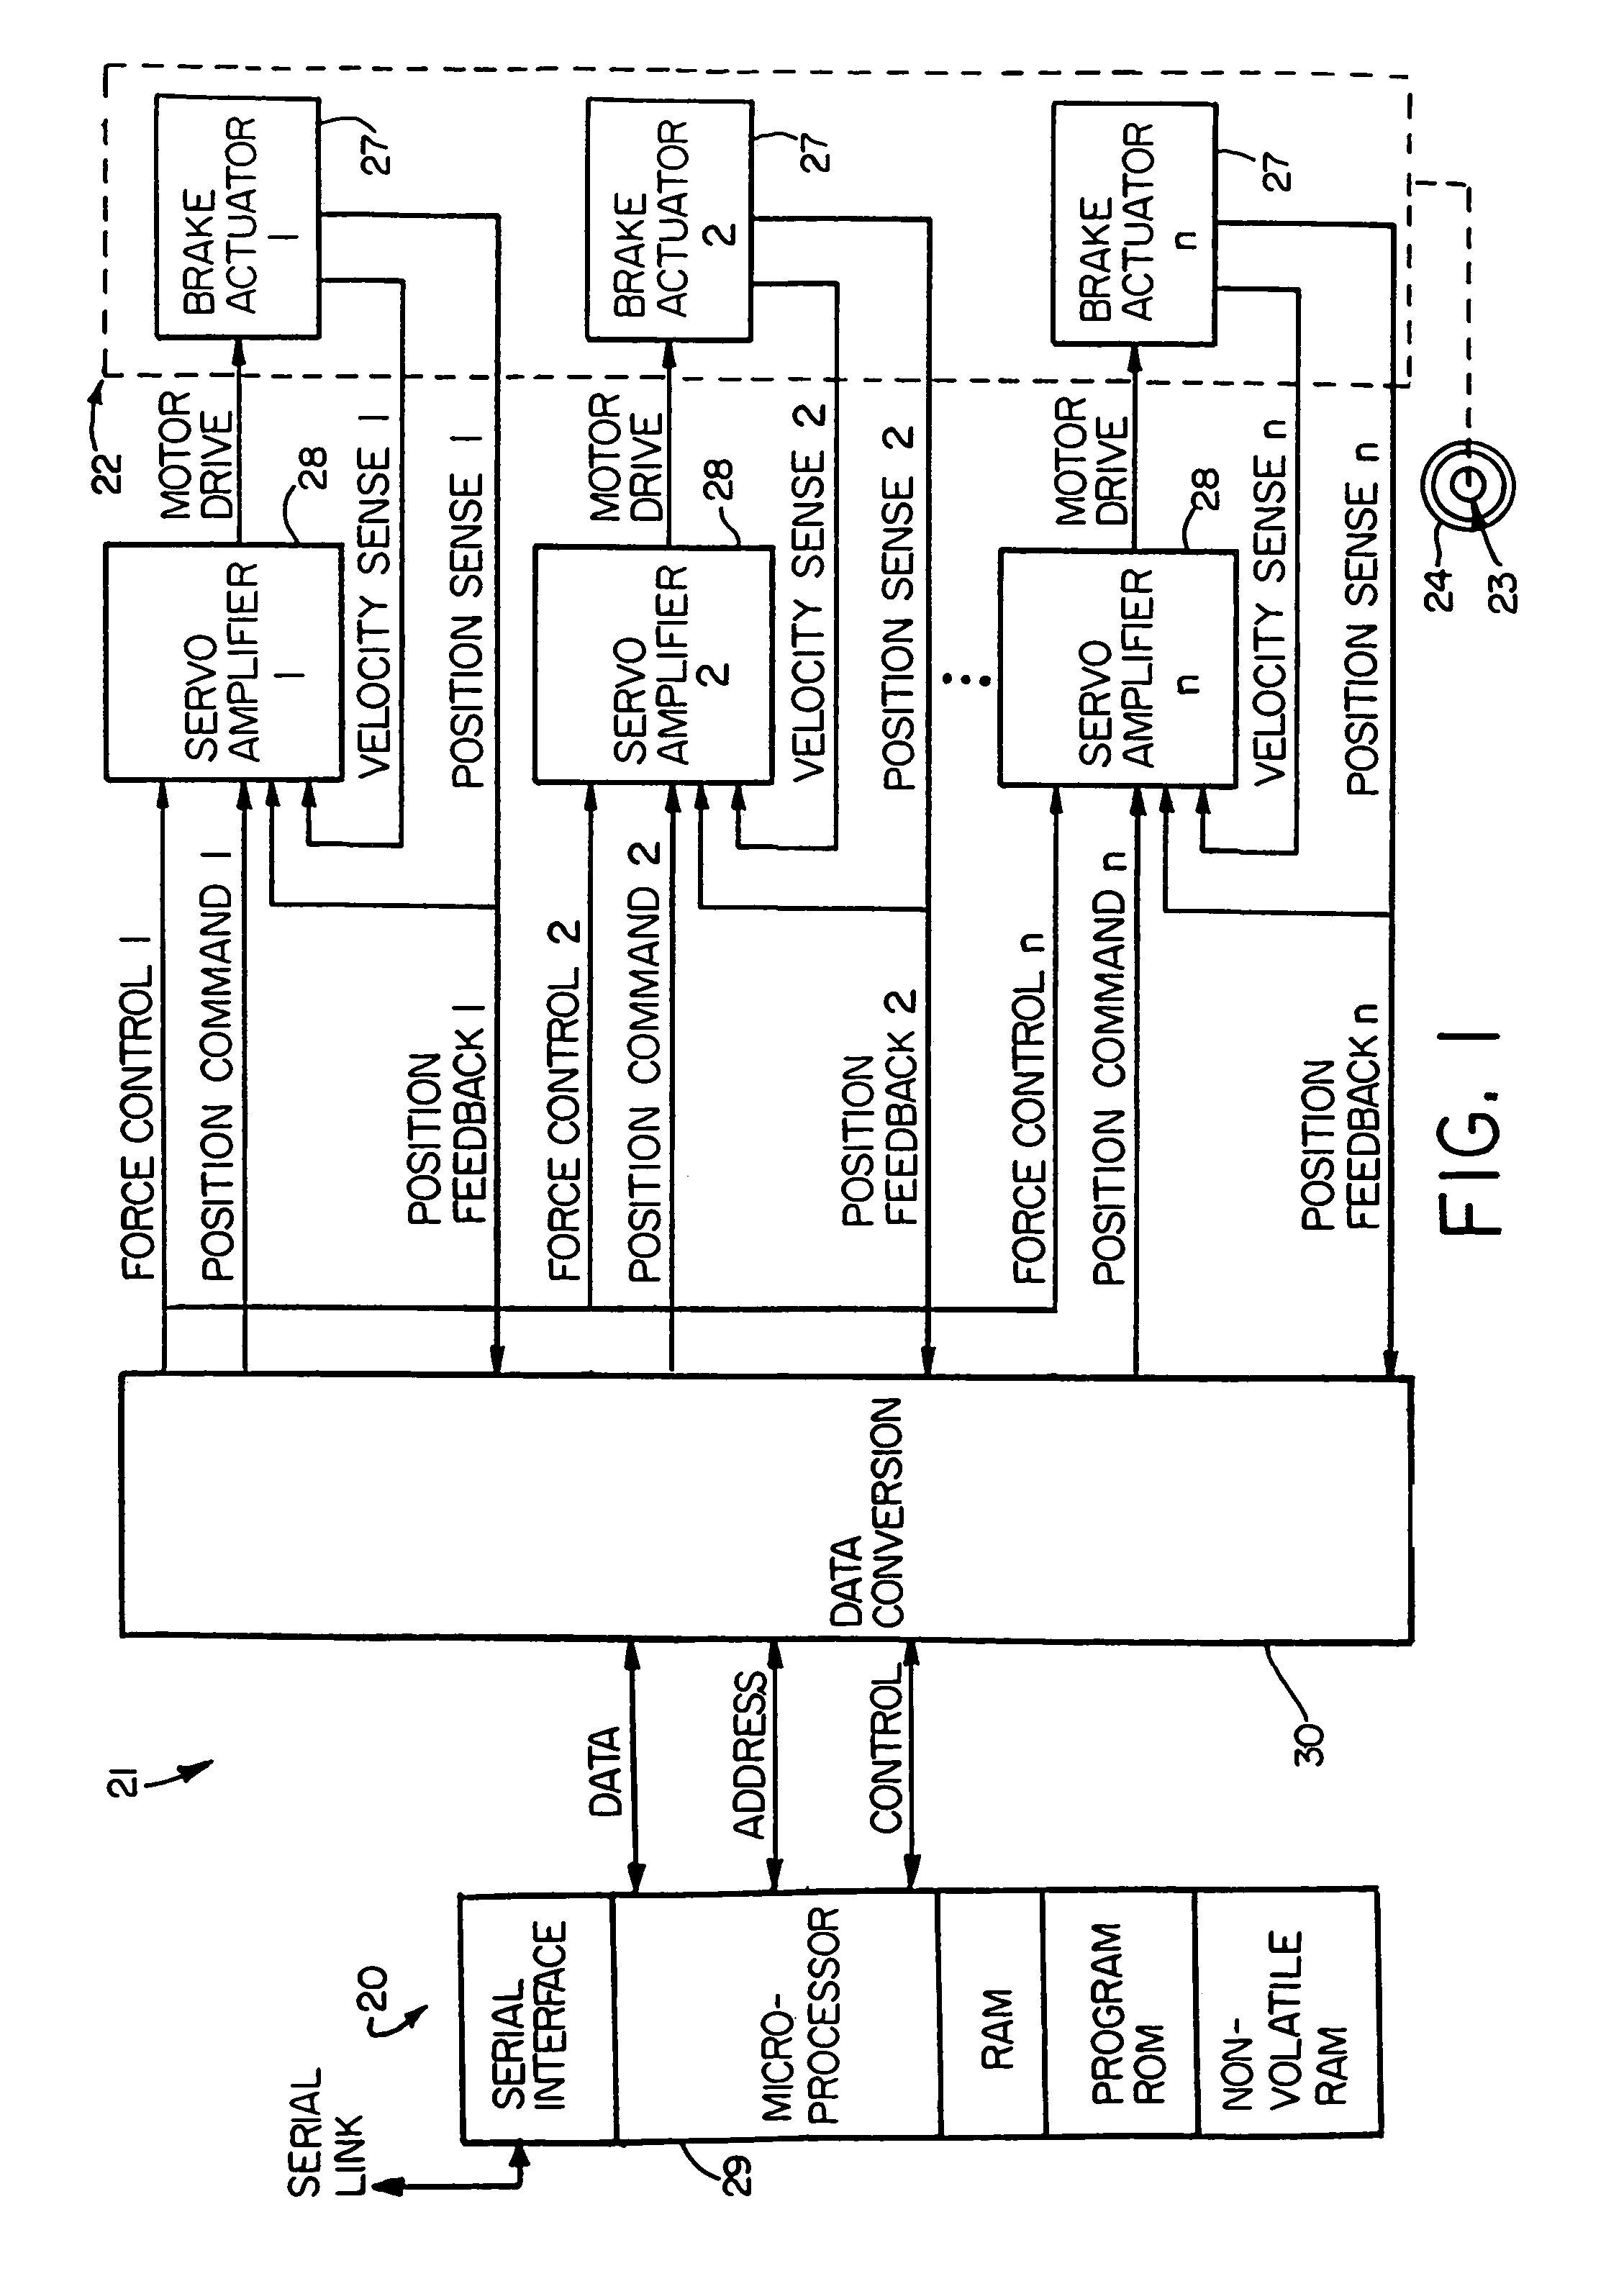 Electronic aircraft braking system with brake wear measurement, running clearance adjustment and plural electric motor-actuator ram assemblies